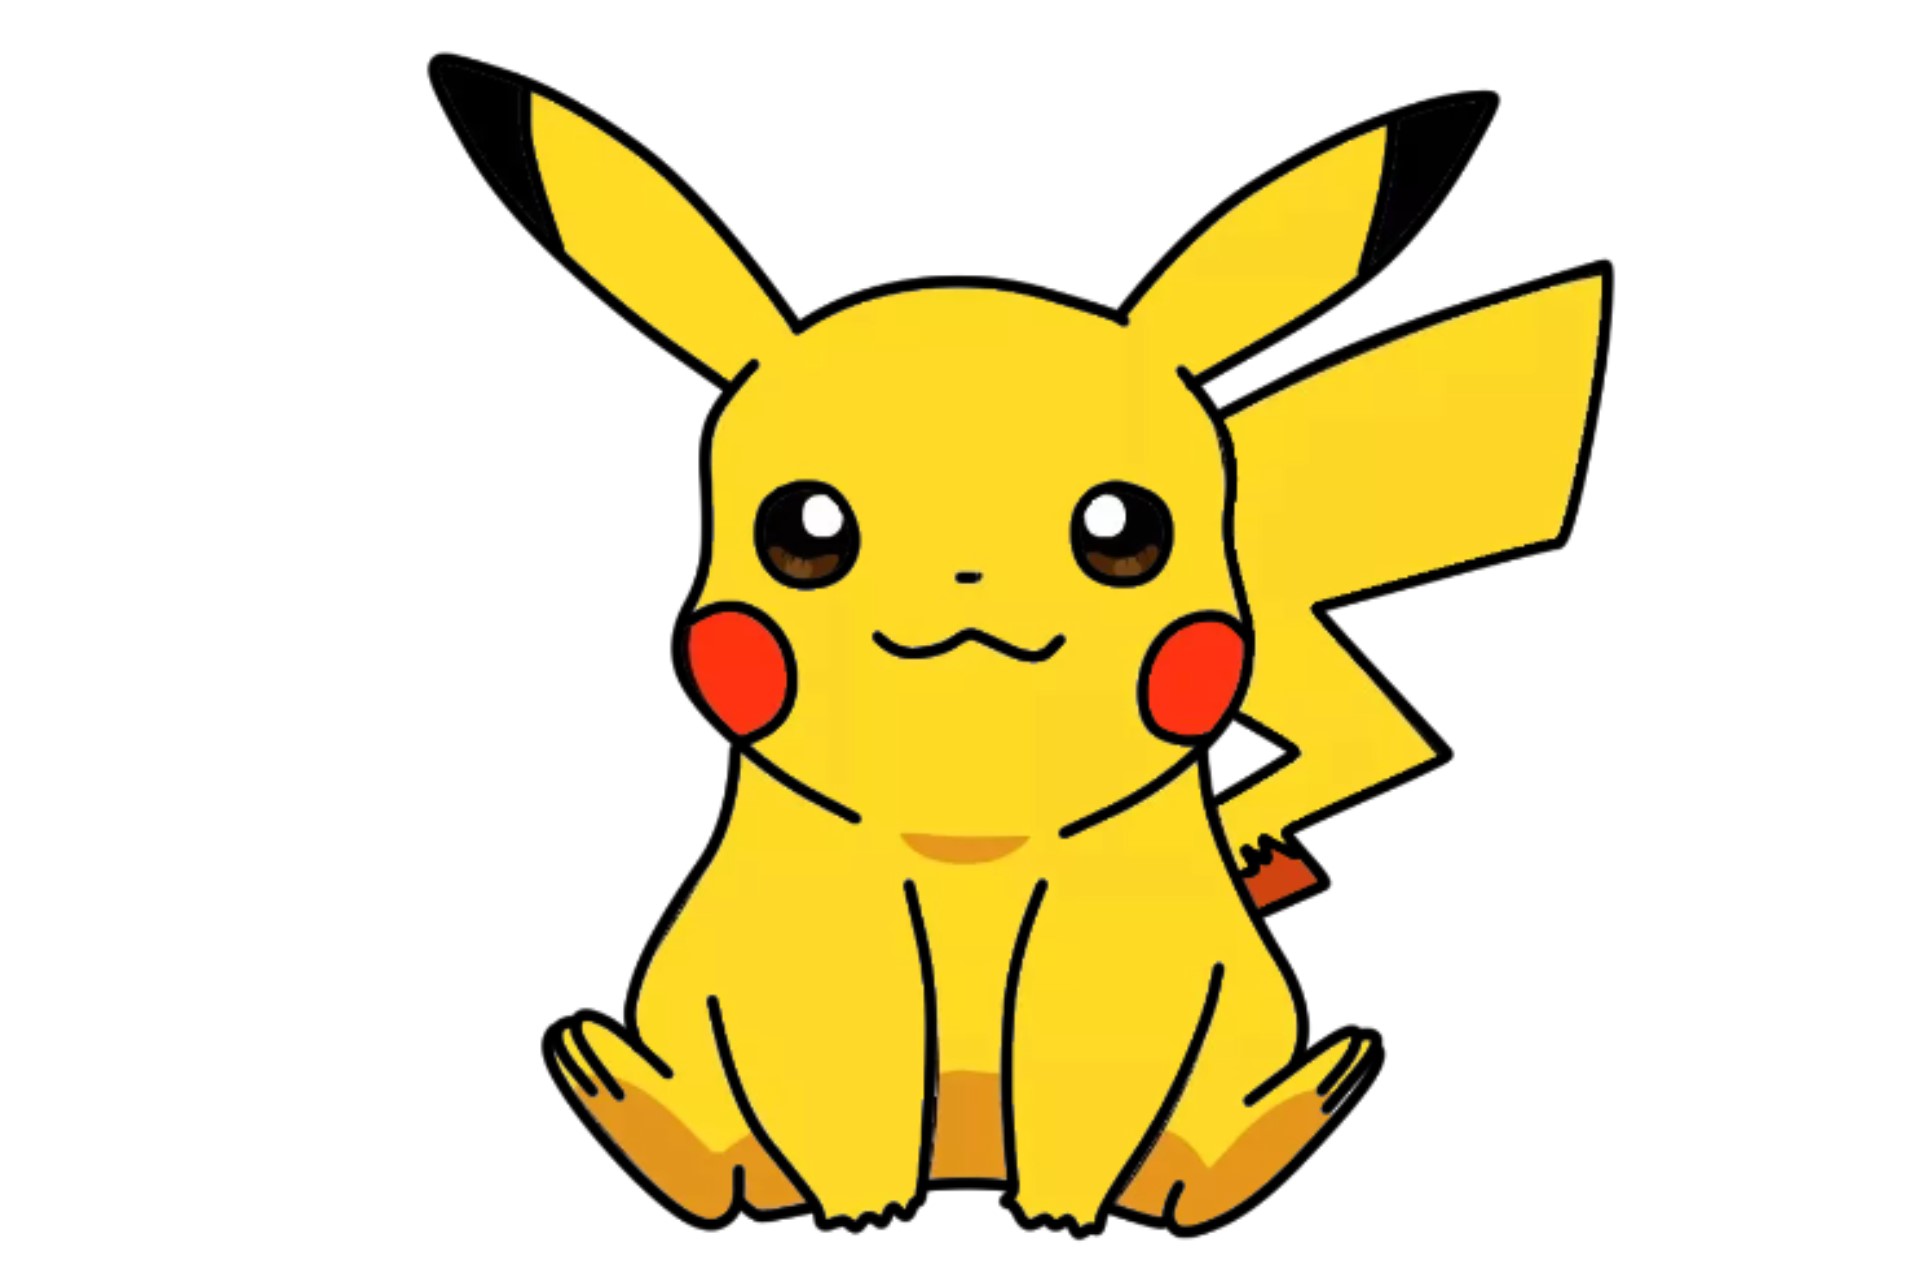 How To Draw Pikachu Easy Step By Step Pokemon Charact vrogue.co